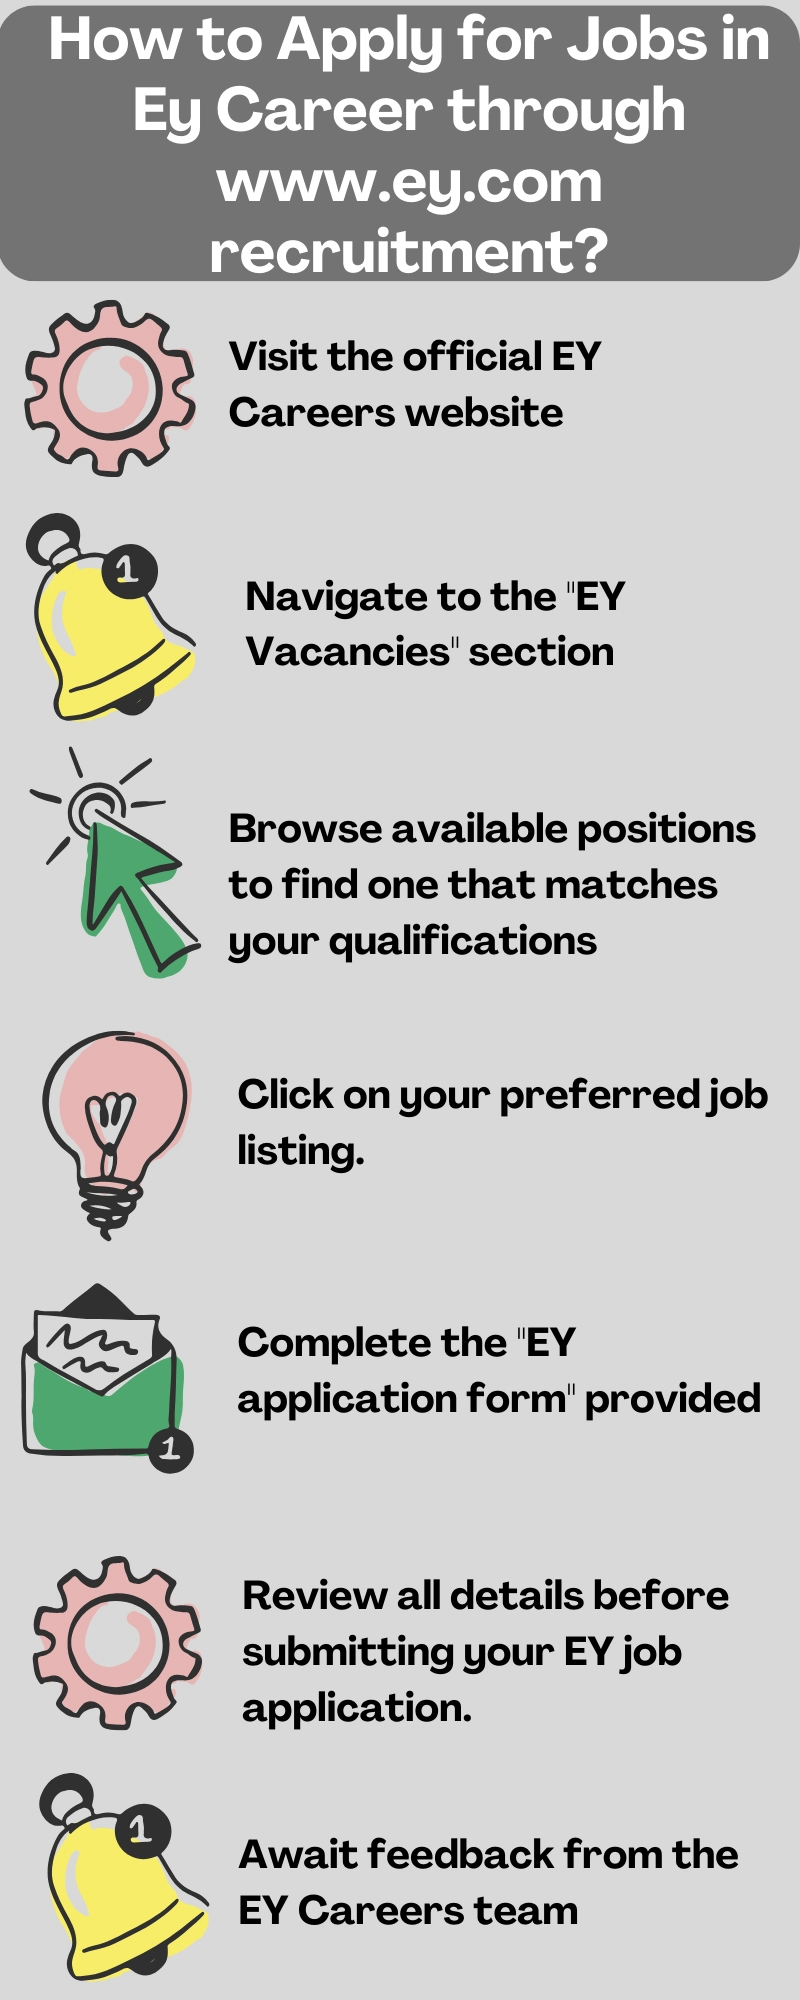 How to Apply for Jobs in Ey Career through www.ey.com recruitment?